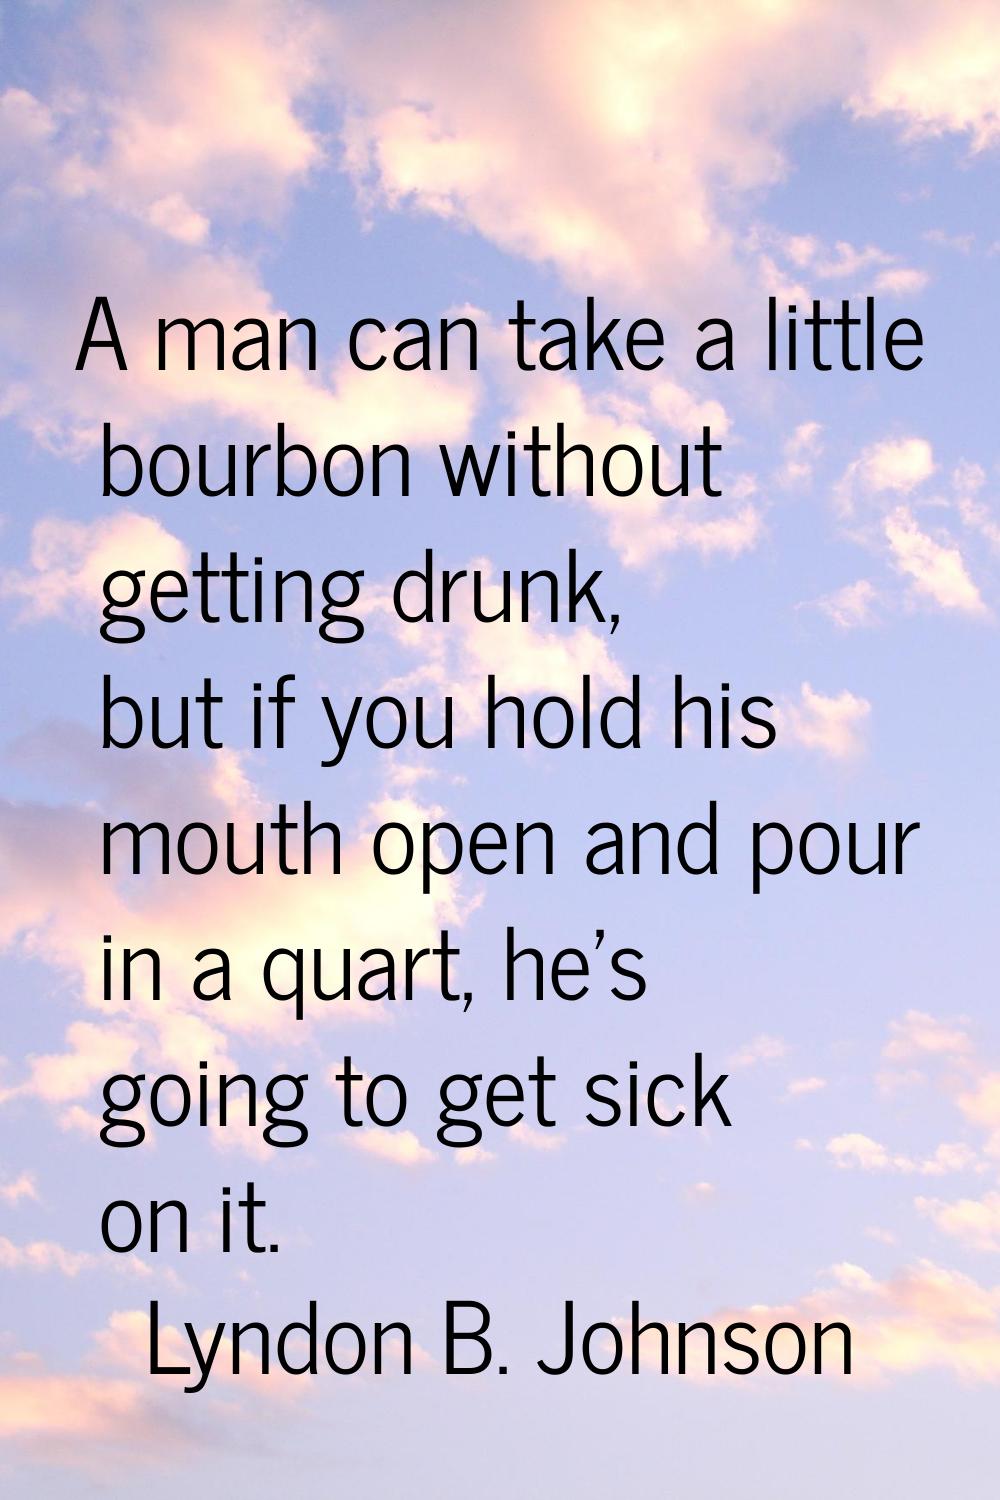 A man can take a little bourbon without getting drunk, but if you hold his mouth open and pour in a